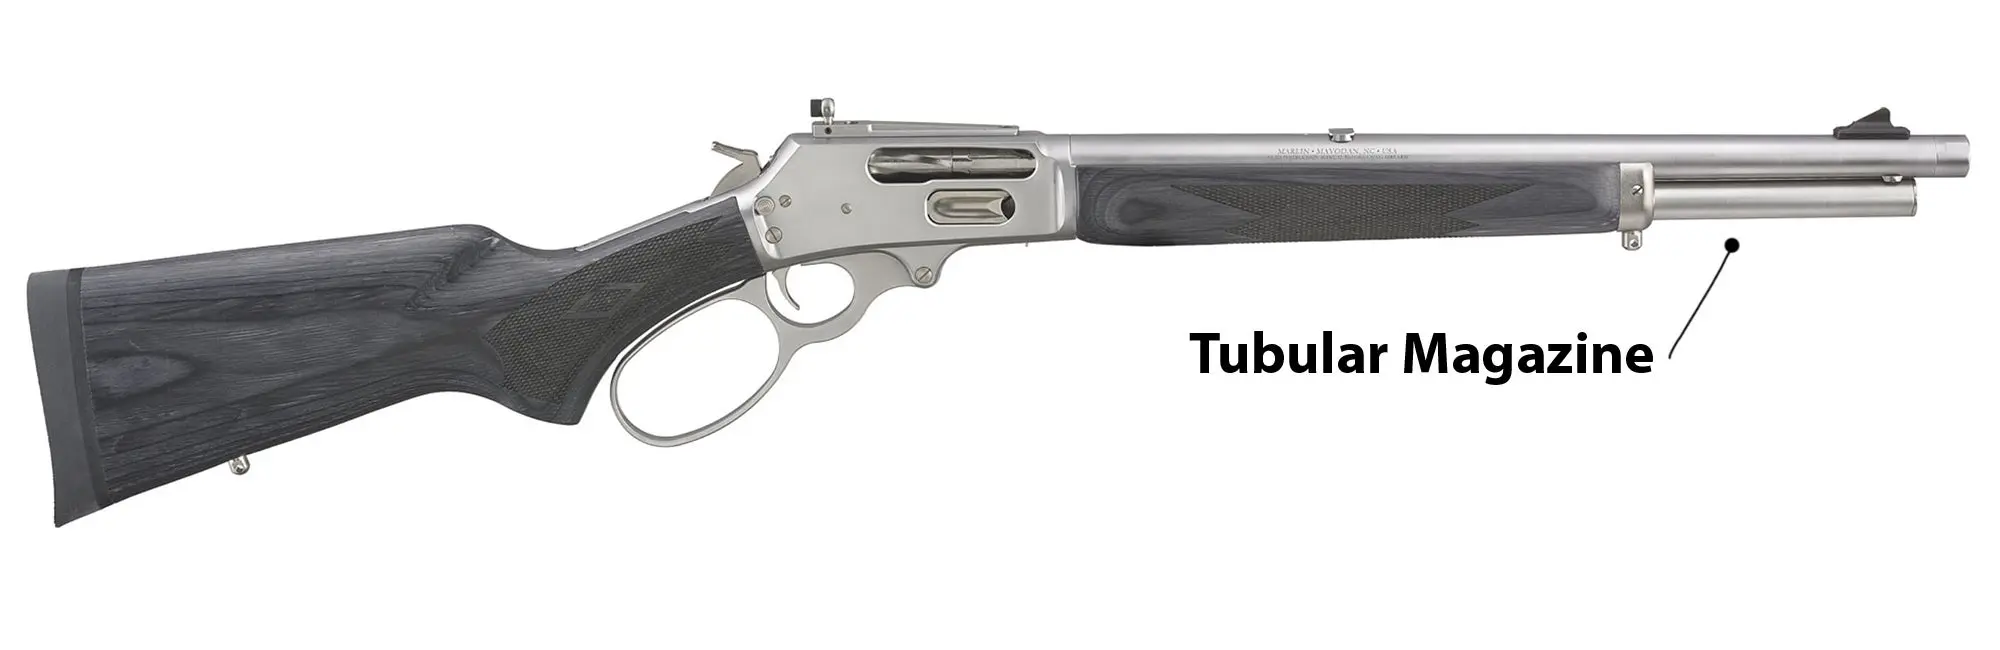 photo showing a lever-action rifle with a tubular magazine